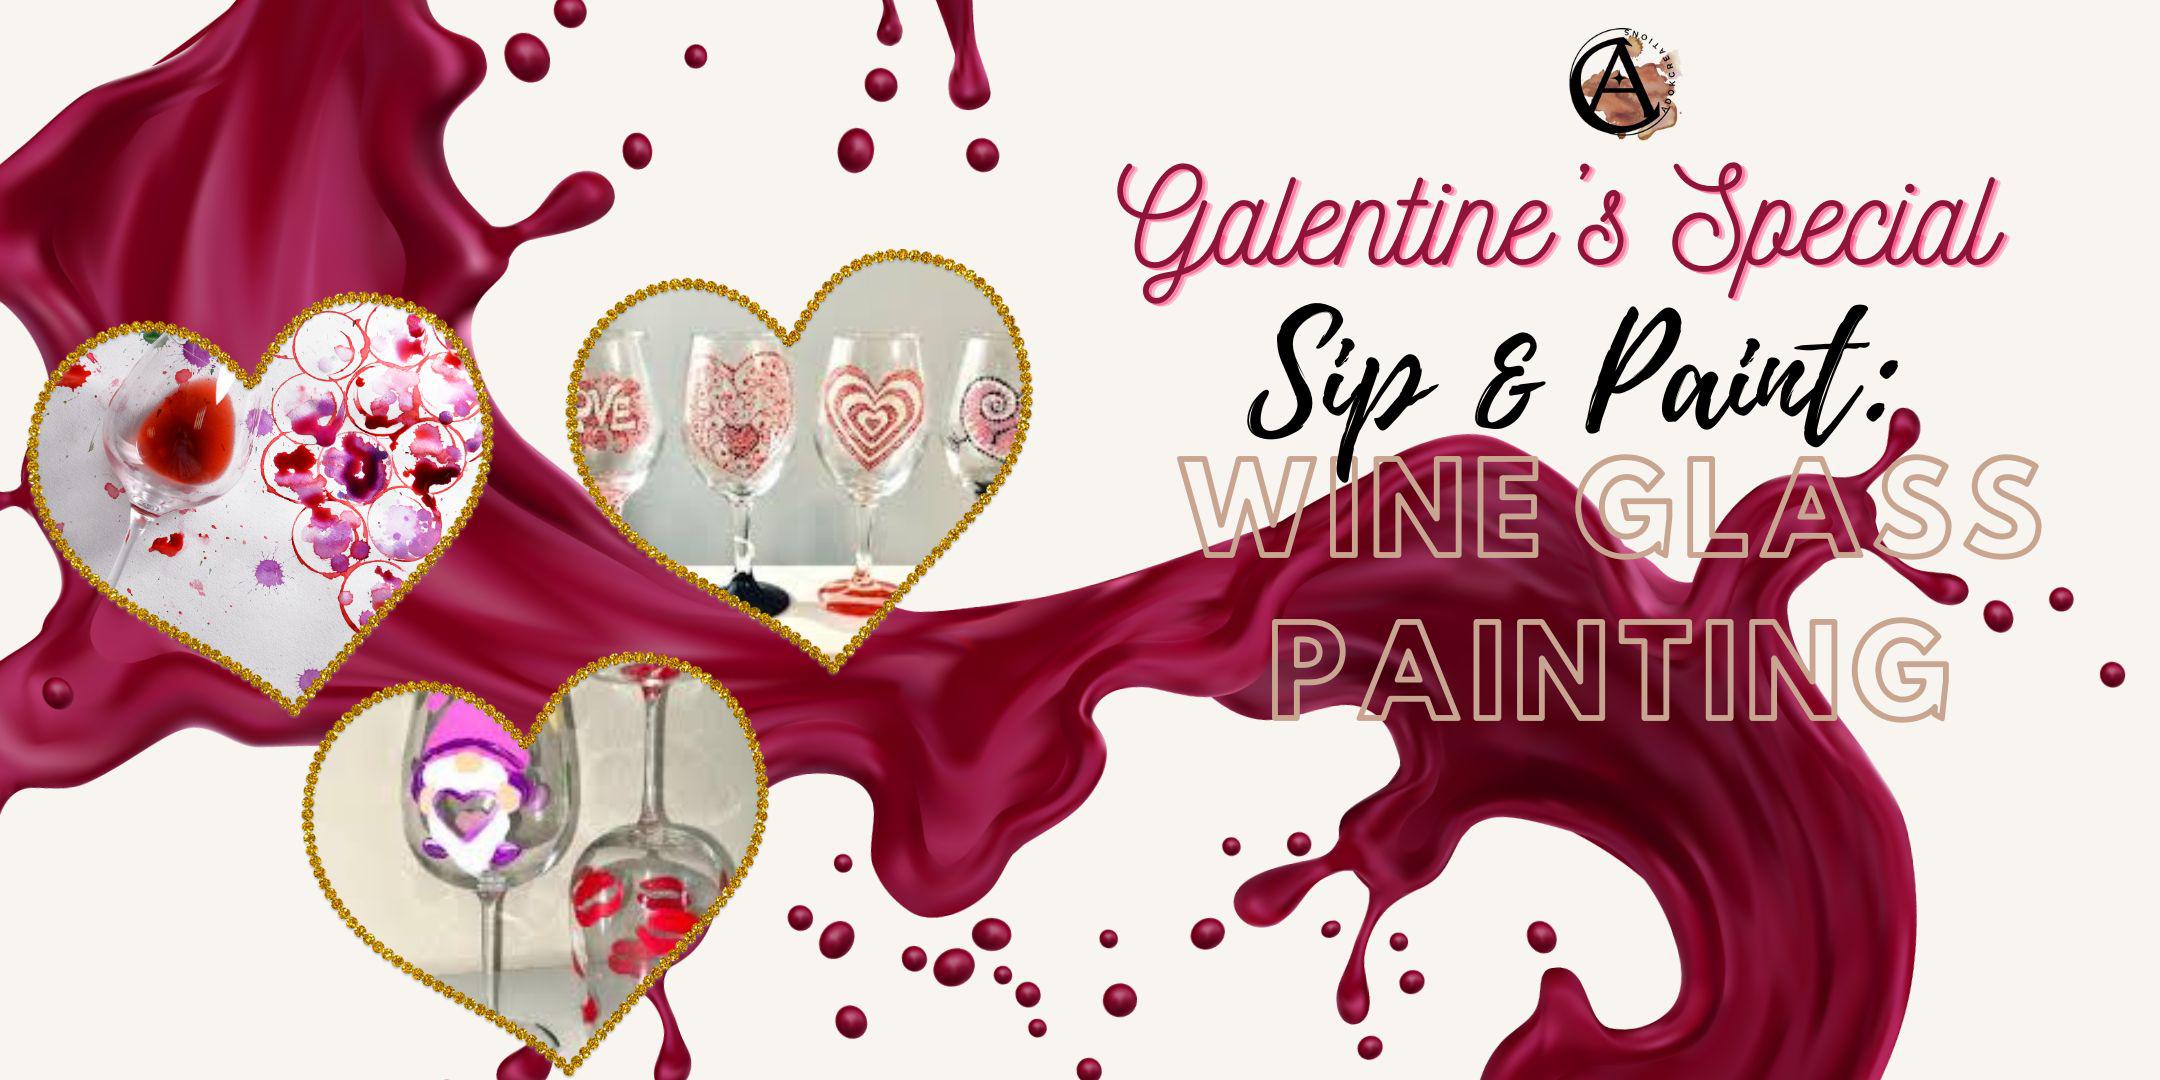 1/31: Galentine's Wine Glass Paint Party — Welcome